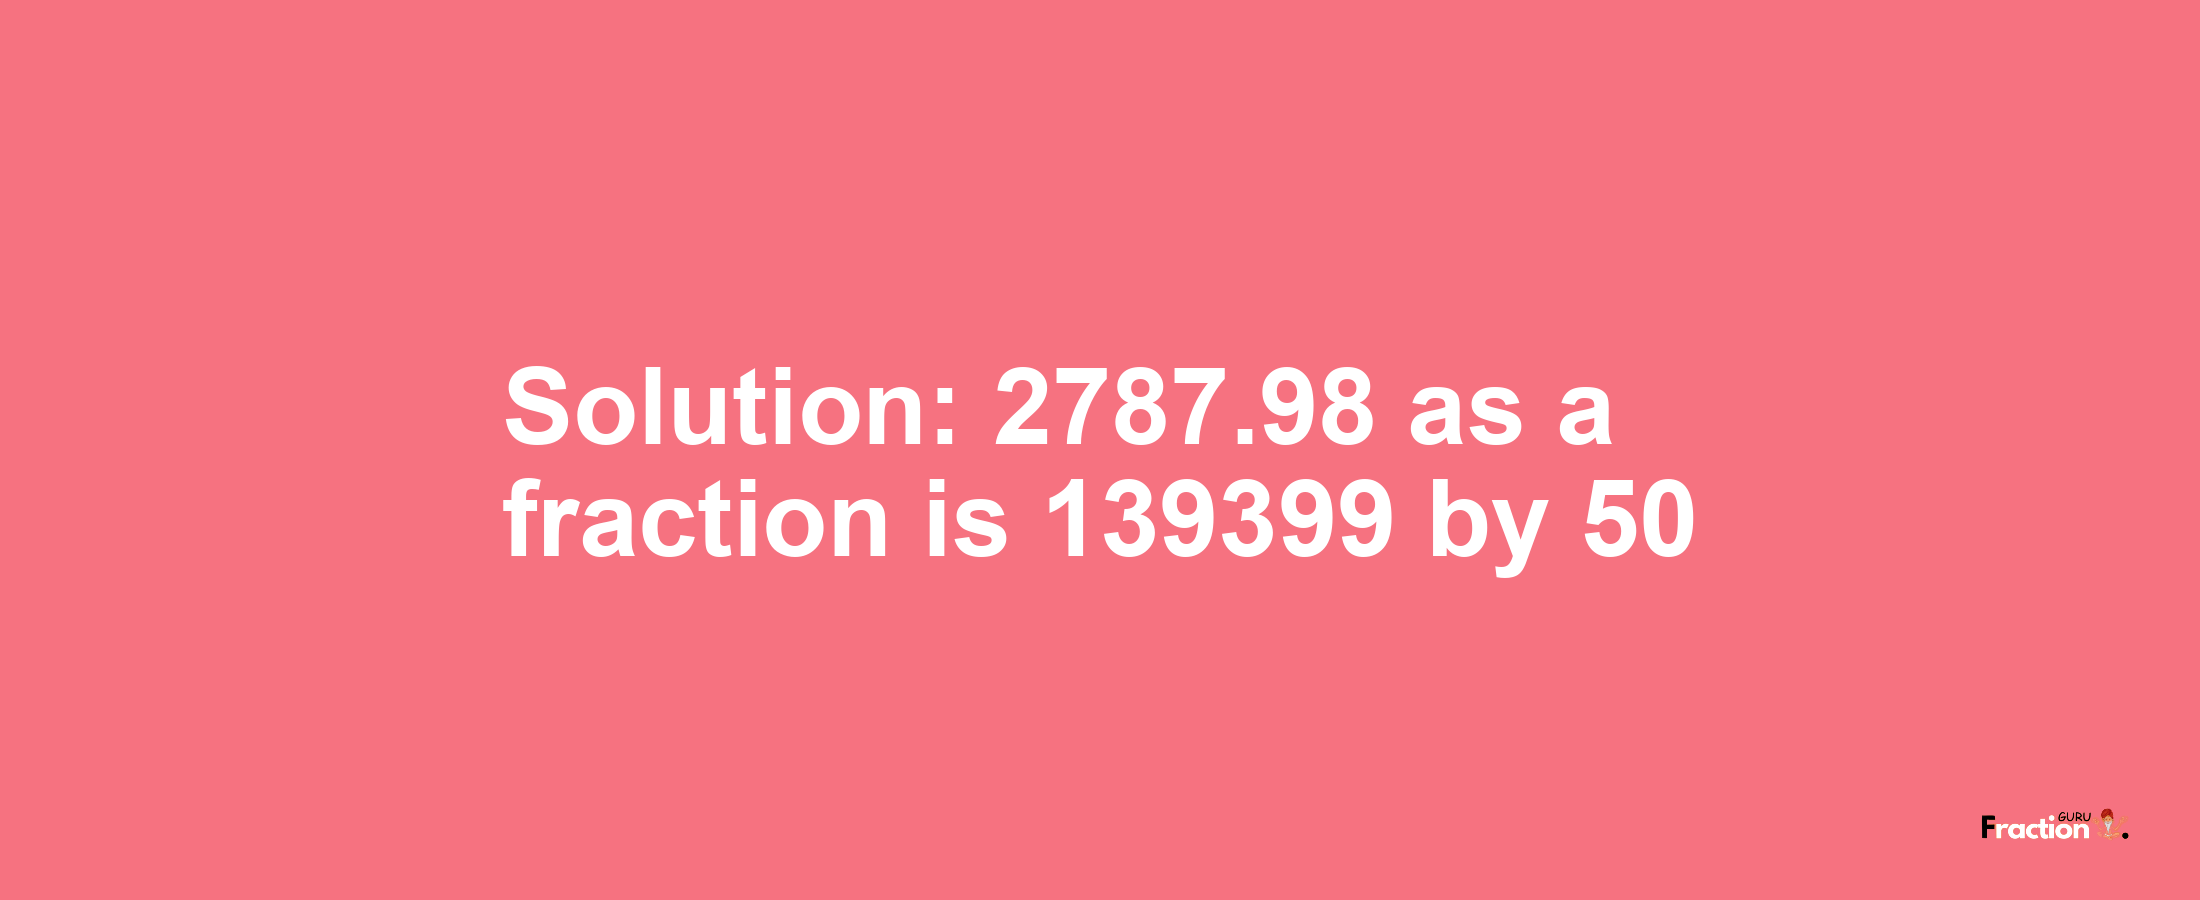 Solution:2787.98 as a fraction is 139399/50